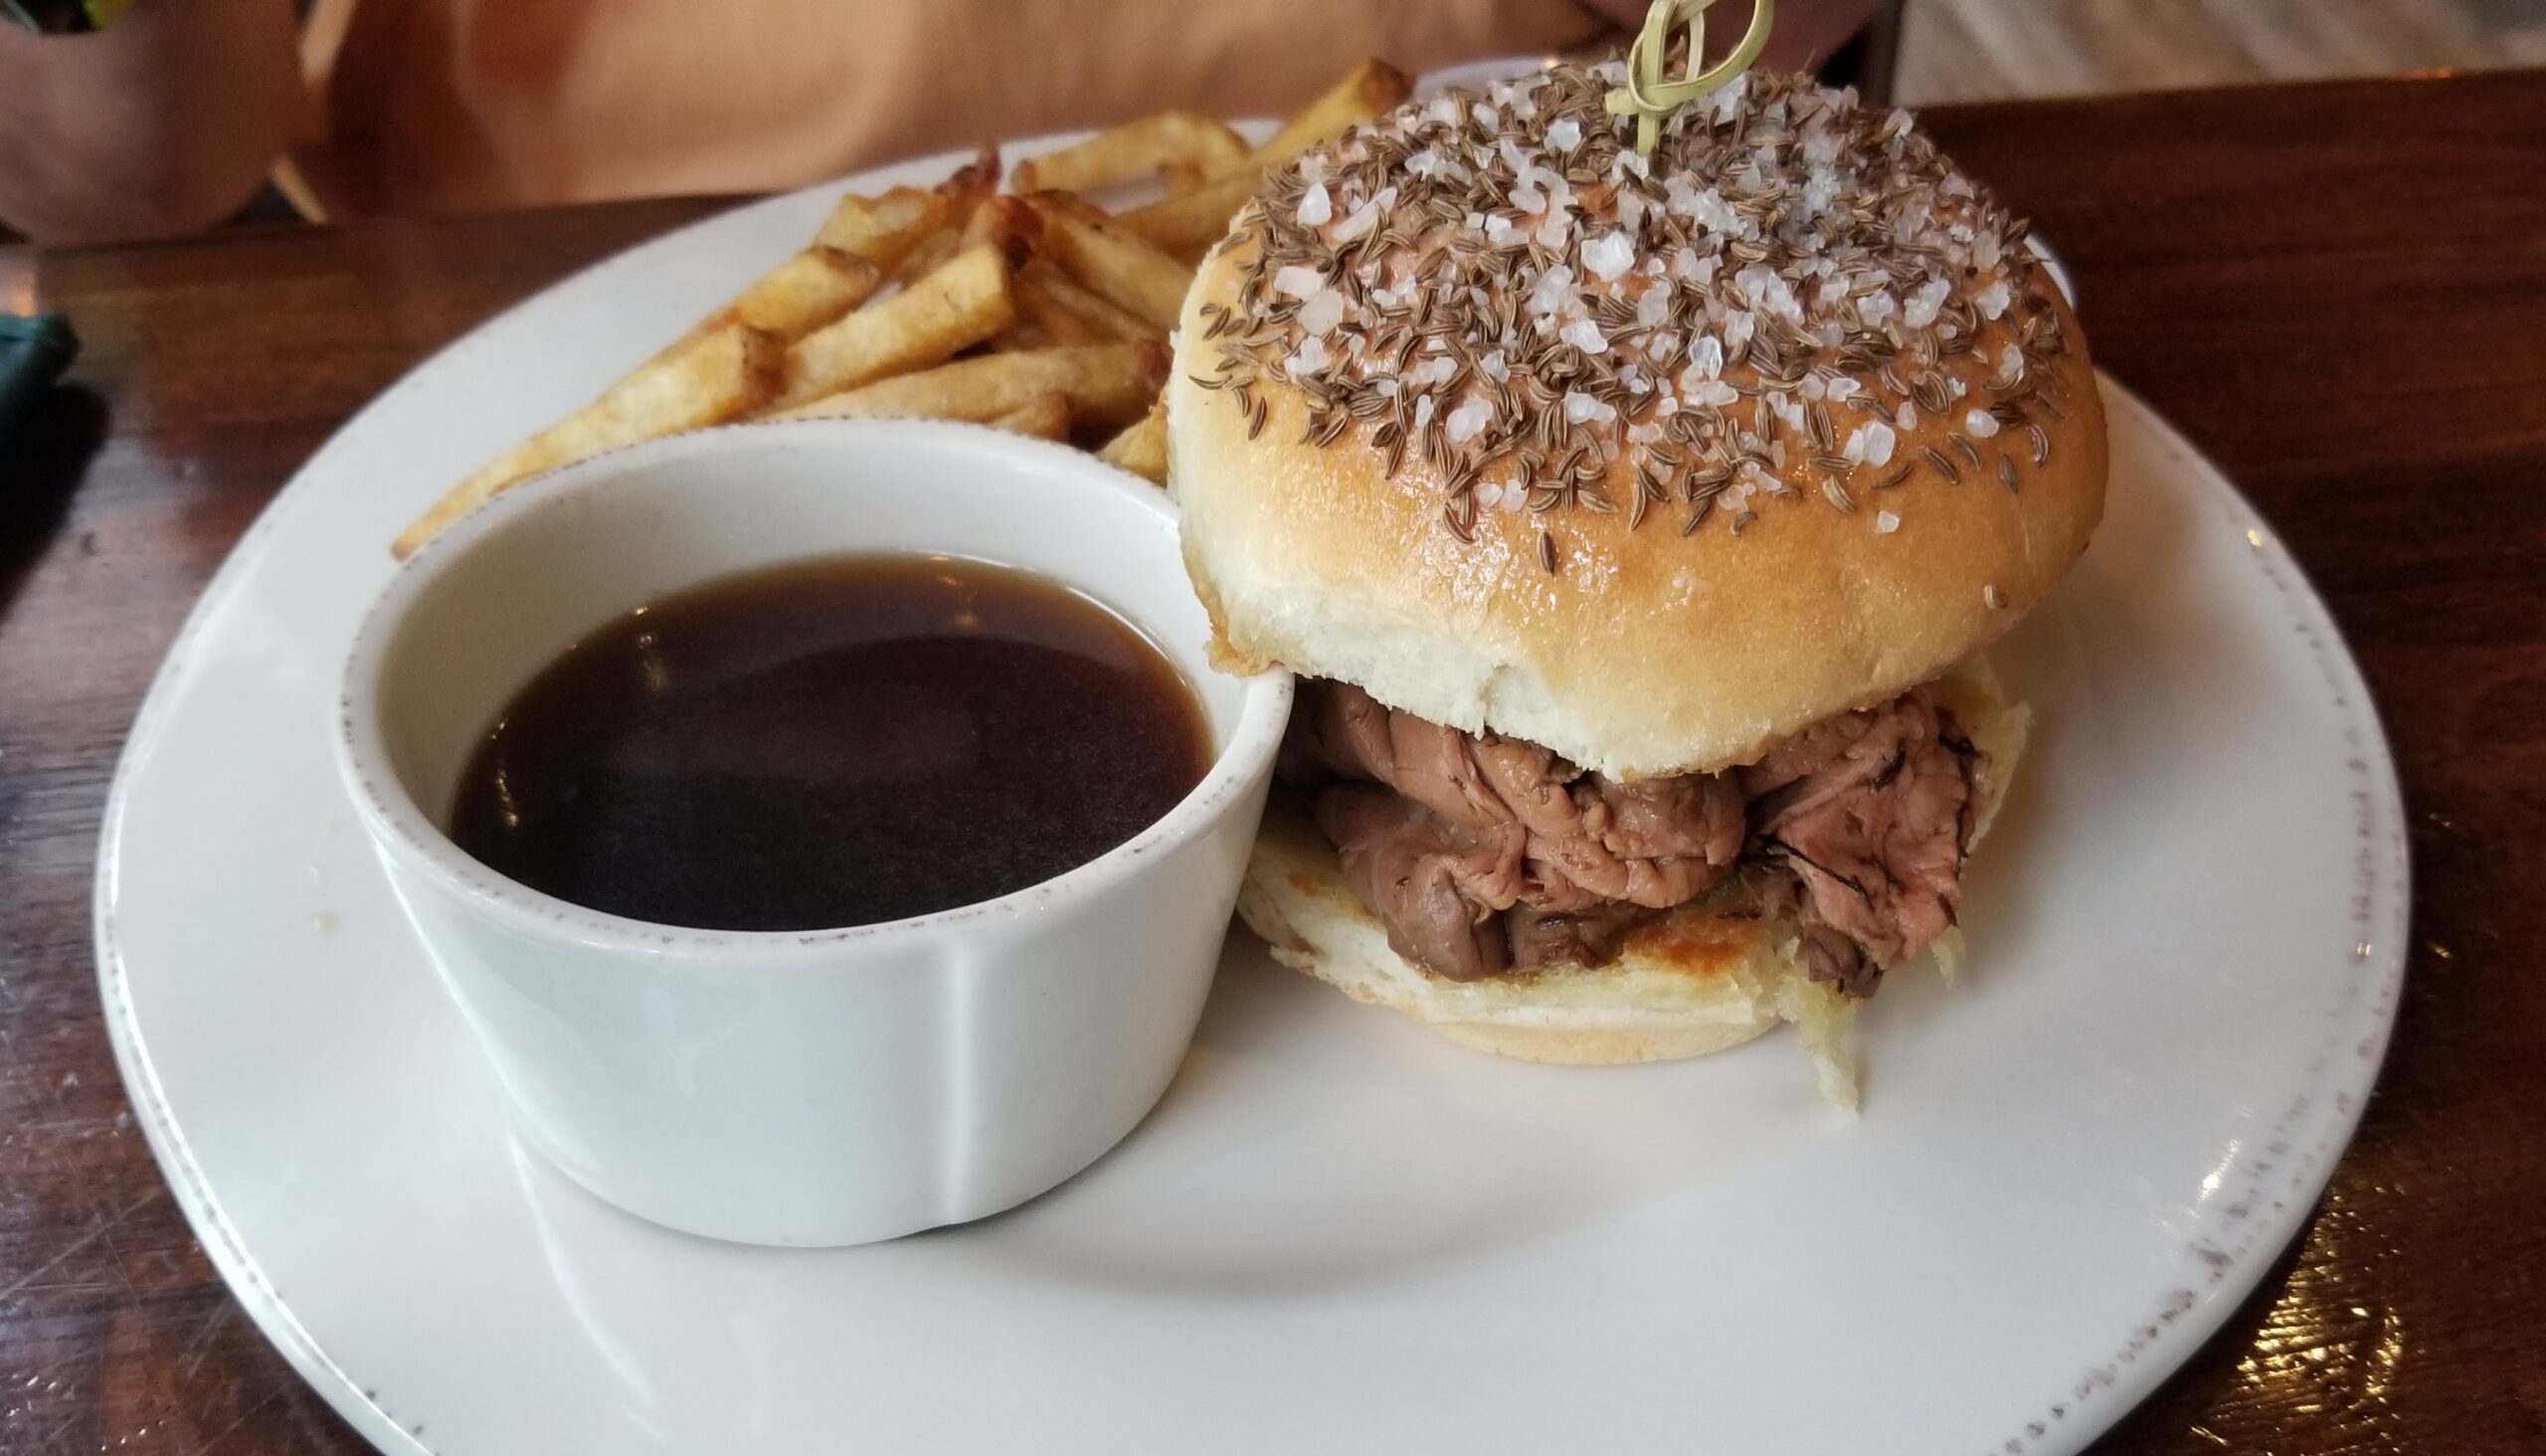 Beef on Weck at Colter Bay Grill www.colterbaybuffalo.com